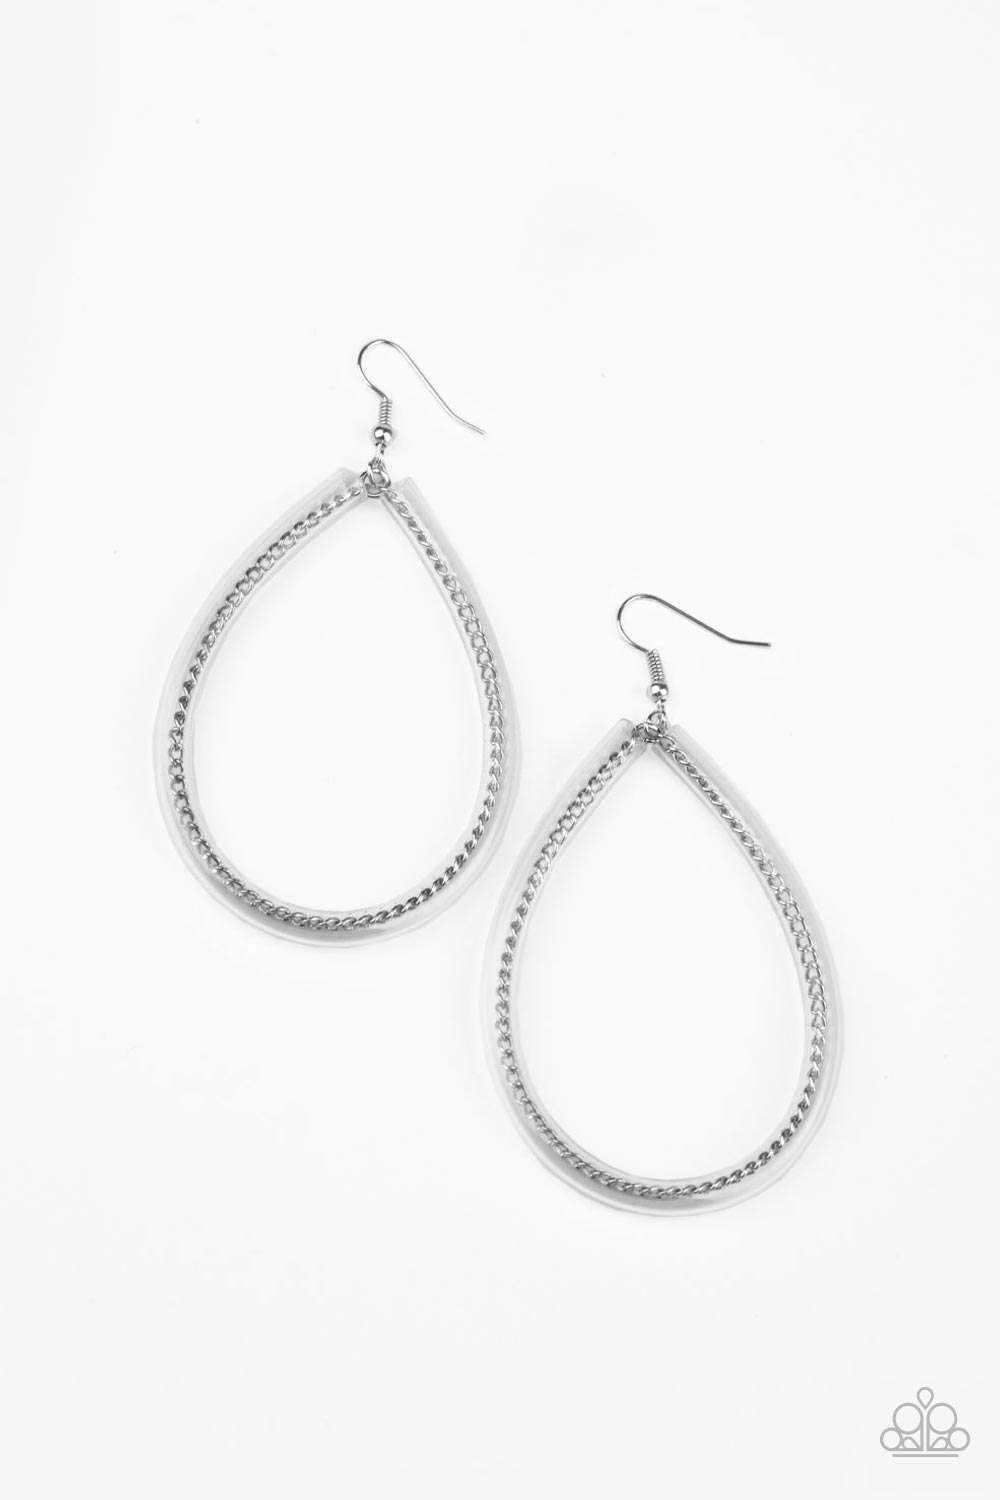 Paparazzi Earrings - Clear fish hook style with metal & silver inner chains. 